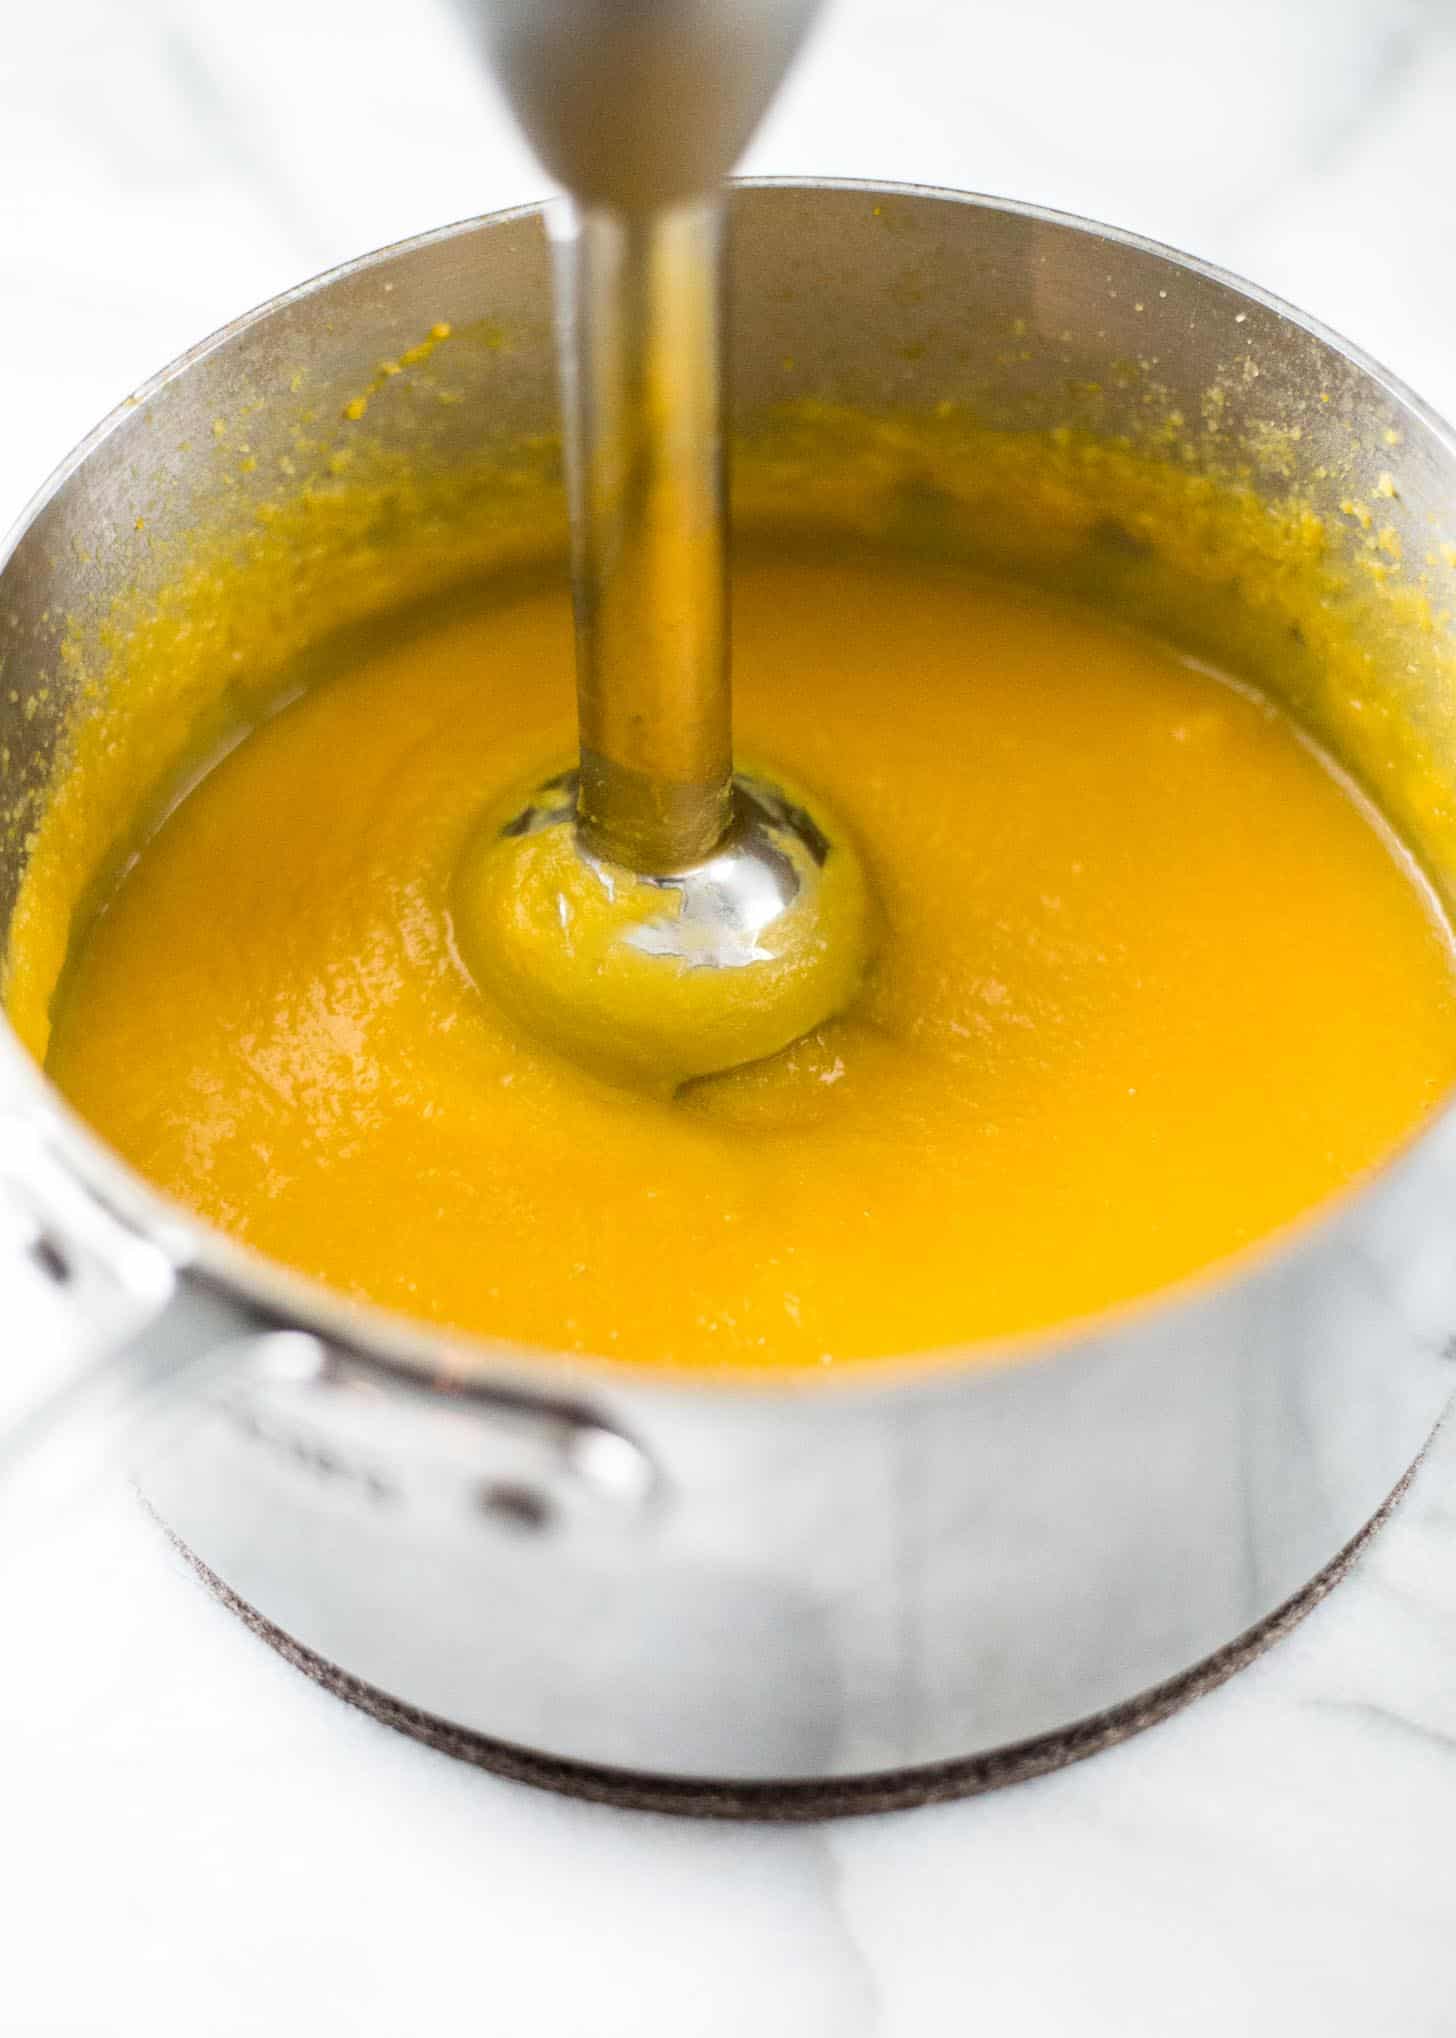 blending Soup with an immersion blender